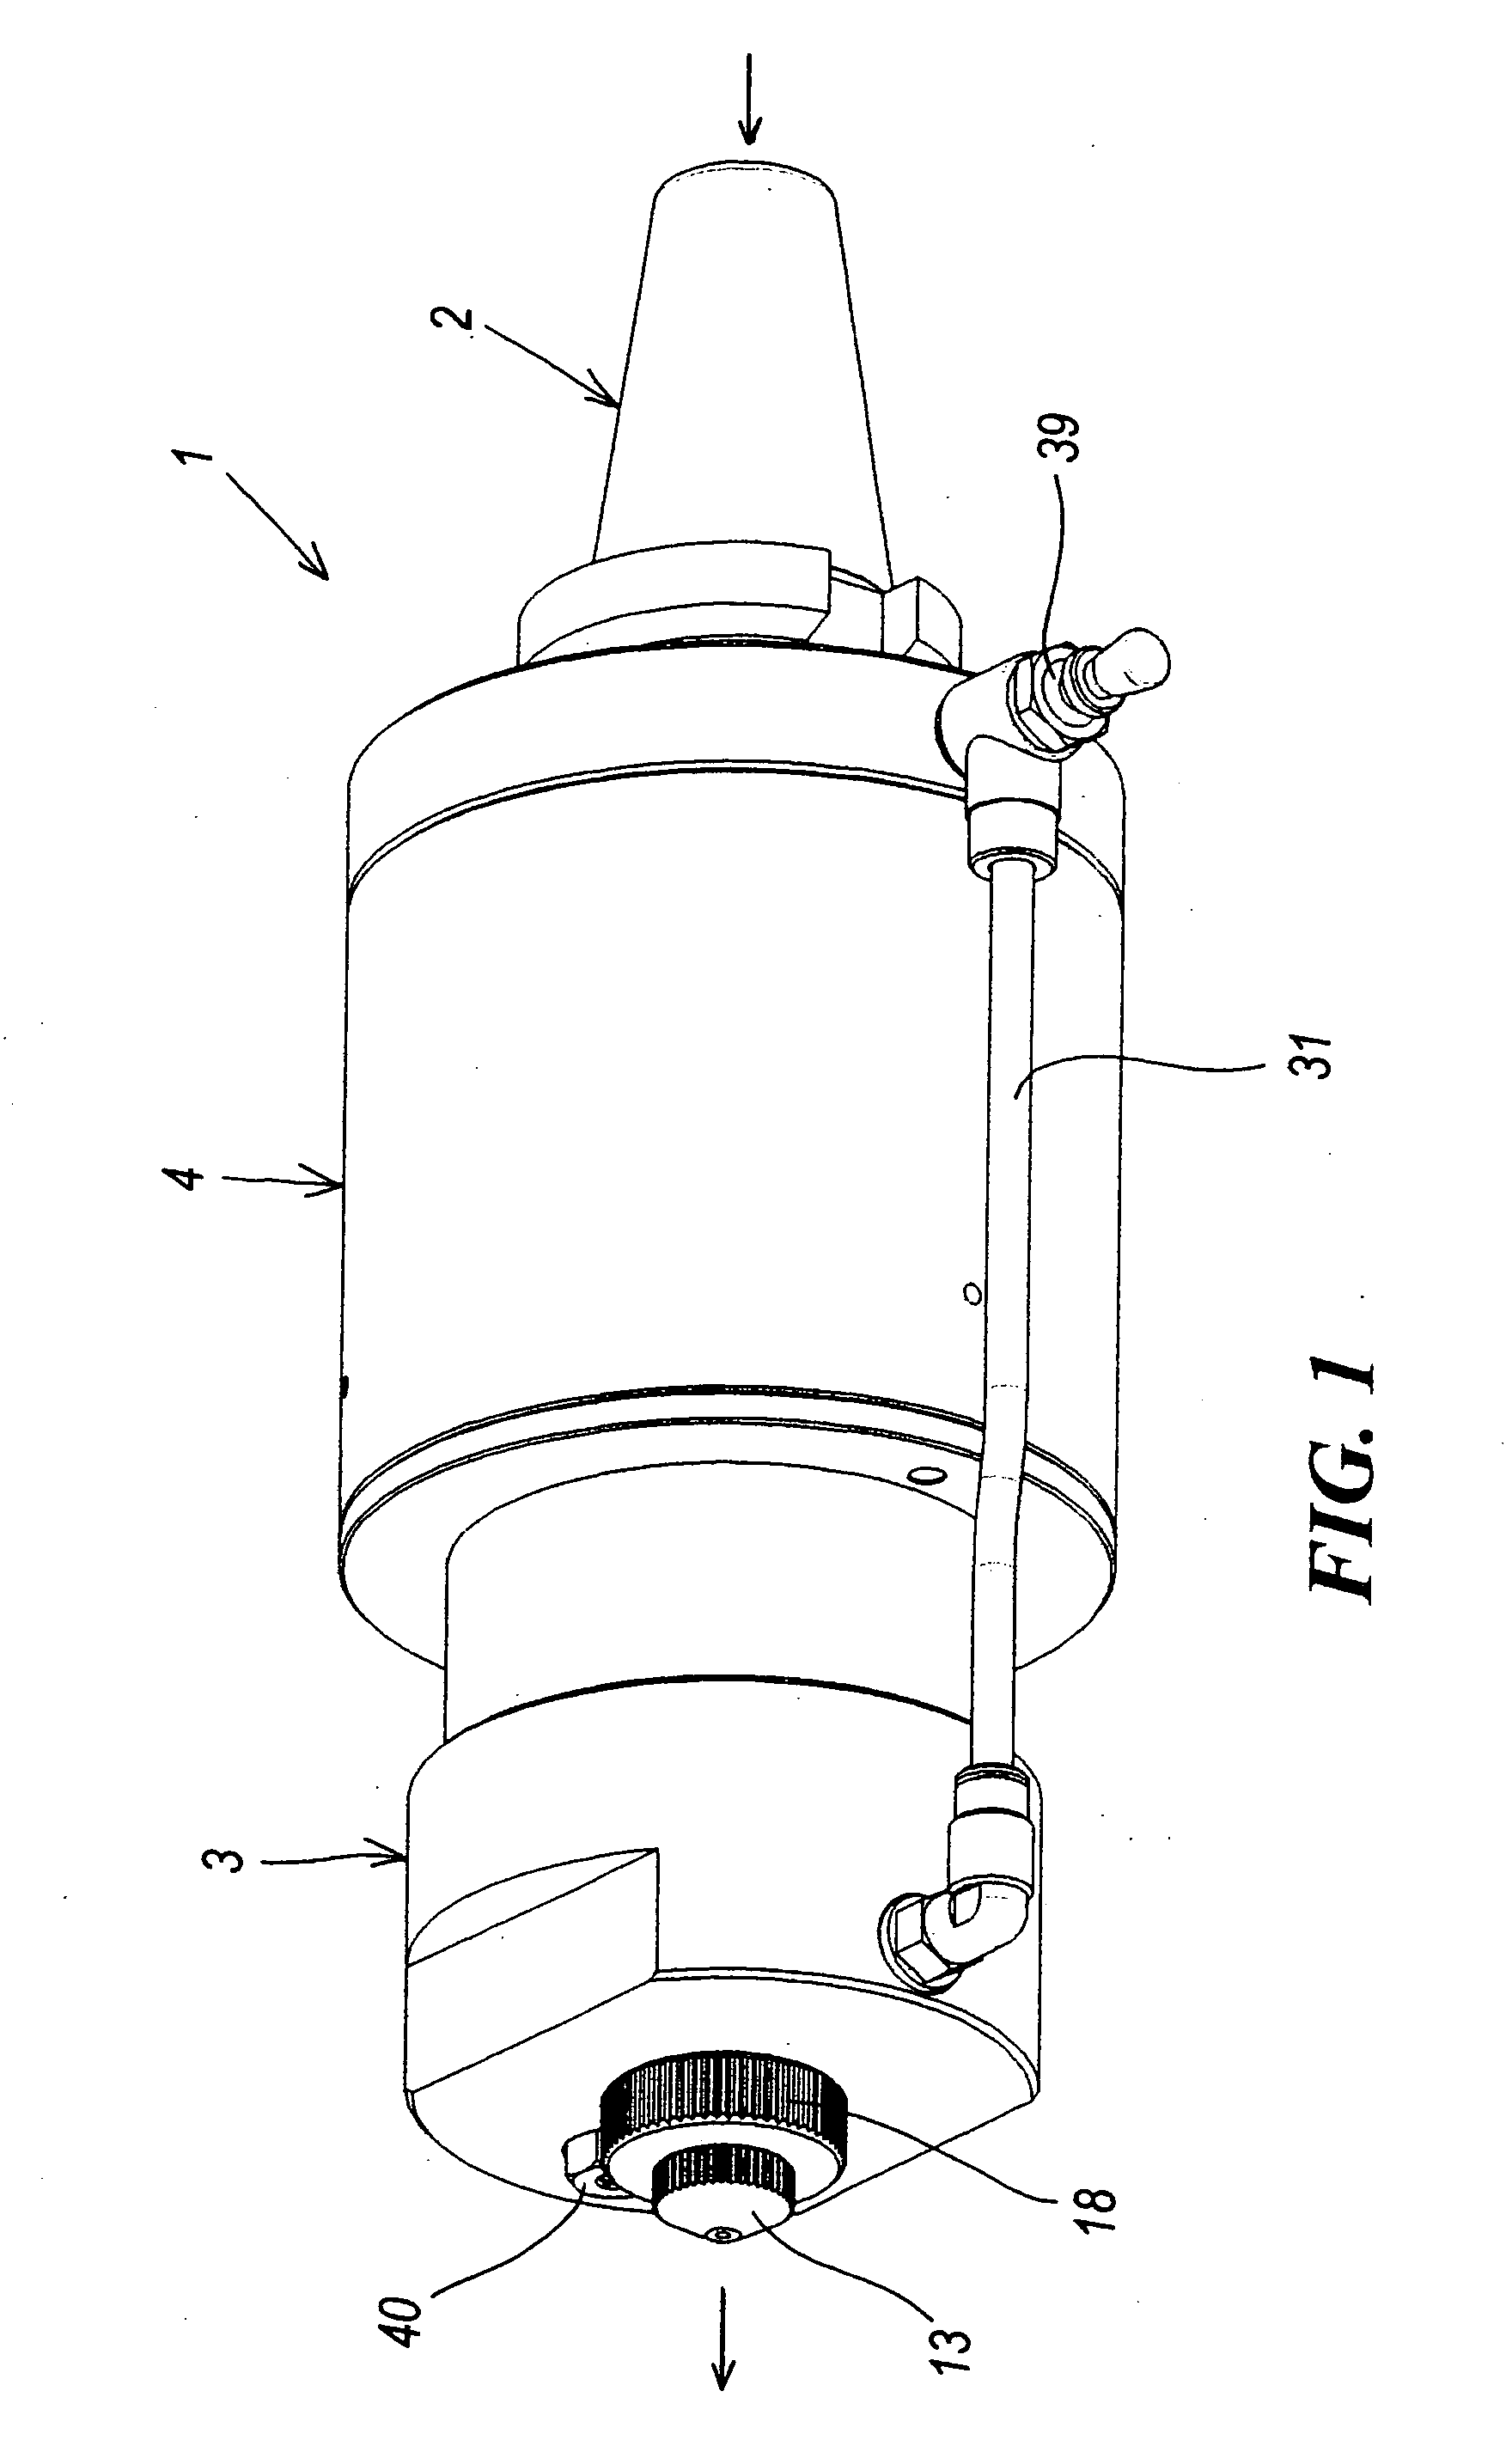 Lubrication device for machine tools